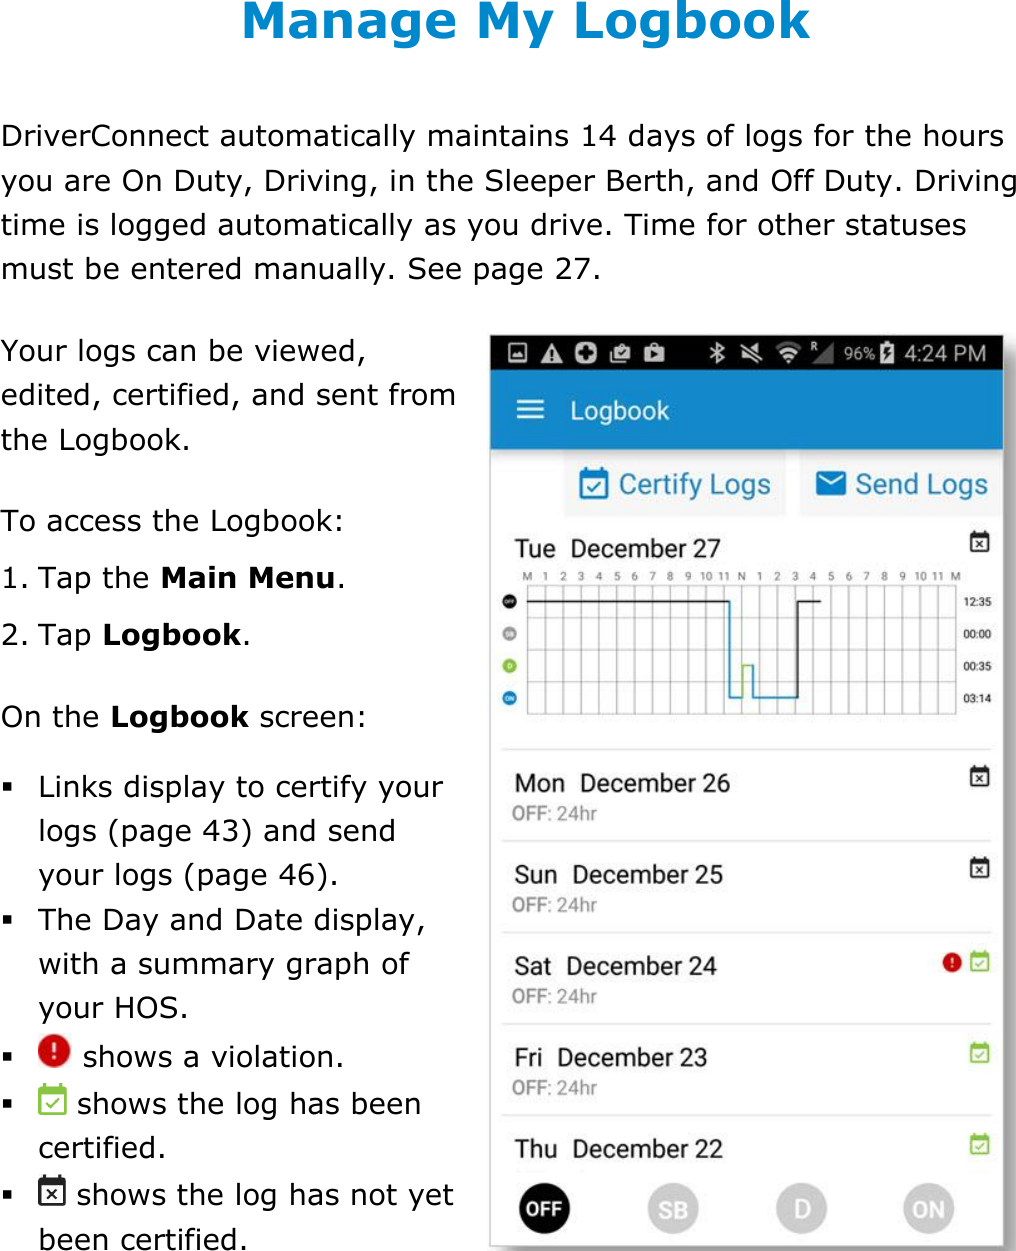 Manage My Logbook DriverConnect User Guide  39 © 2016-2017, Rand McNally, Inc. Manage My Logbook DriverConnect automatically maintains 14 days of logs for the hours you are On Duty, Driving, in the Sleeper Berth, and Off Duty. Driving time is logged automatically as you drive. Time for other statuses must be entered manually. See page 27.  Your logs can be viewed, edited, certified, and sent from the Logbook. To access the Logbook: 1. Tap the Main Menu. 2. Tap Logbook.  On the Logbook screen:  Links display to certify your logs (page 43) and send your logs (page 46).  The Day and Date display, with a summary graph of your HOS.   shows a violation.   shows the log has been certified.   shows the log has not yet been certified.   